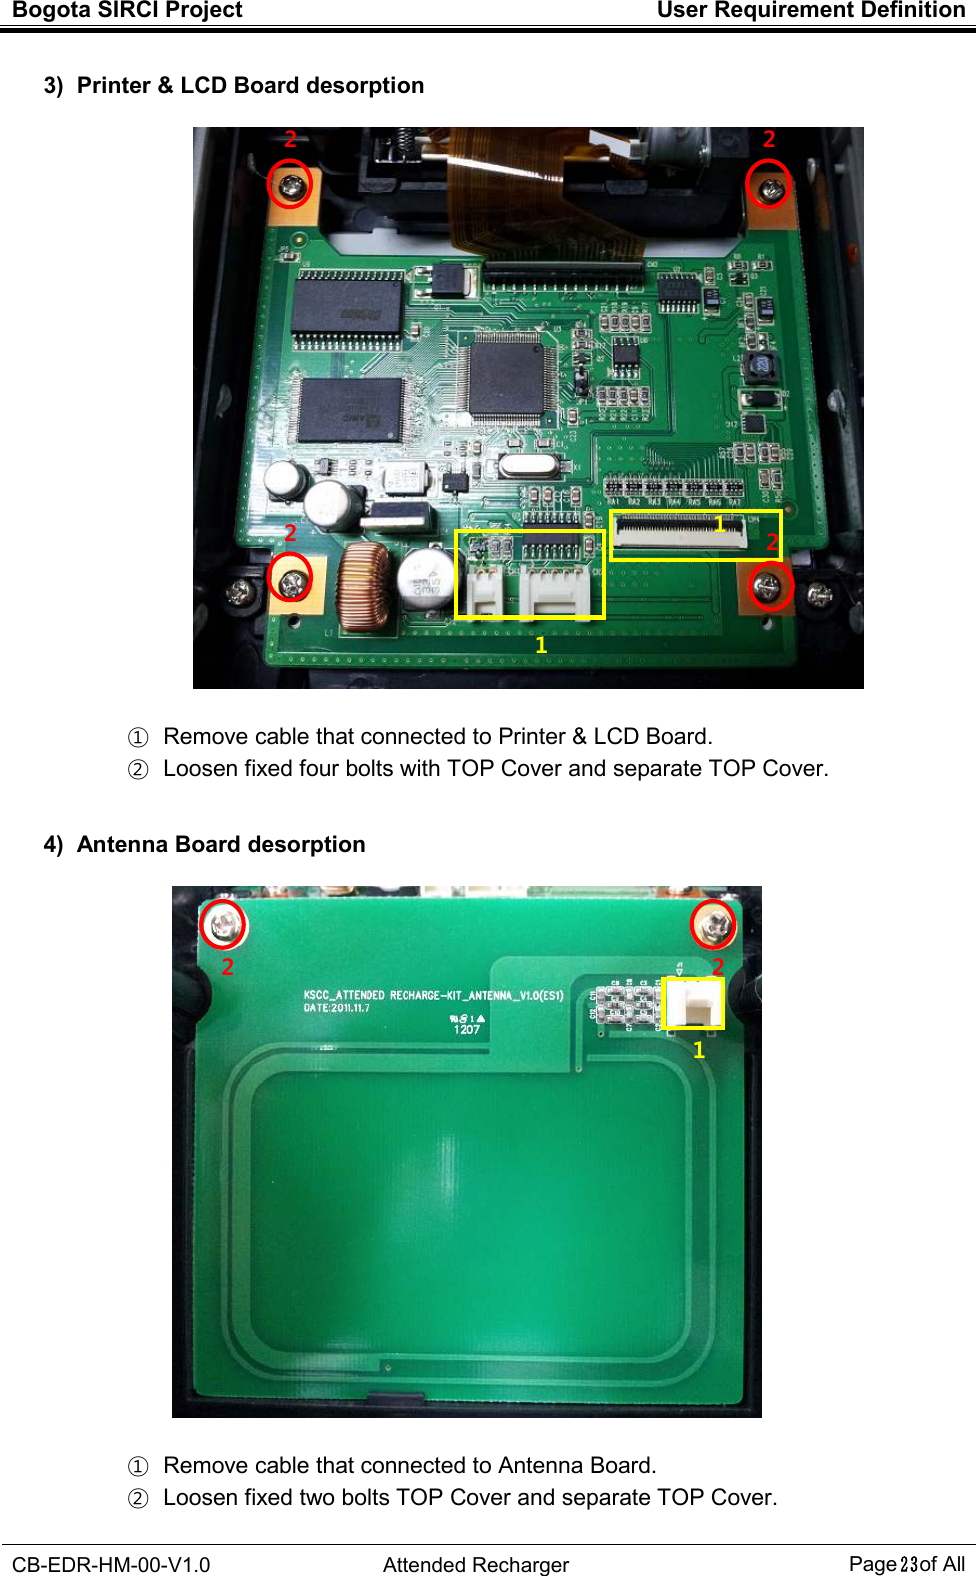 Bogota SIRCI Project  User Requirement Definition  CB-EDR-HM-00-V1.0  Attended Recharger Page２３ of All  3)  Printer &amp; LCD Board desorption    ①   Remove cable that connected to Printer &amp; LCD Board. ②   Loosen fixed four bolts with TOP Cover and separate TOP Cover.   4)  Antenna Board desorption    ①   Remove cable that connected to Antenna Board. ②   Loosen fixed two bolts TOP Cover and separate TOP Cover. 2 1 1 2 2  2 1 2  2 